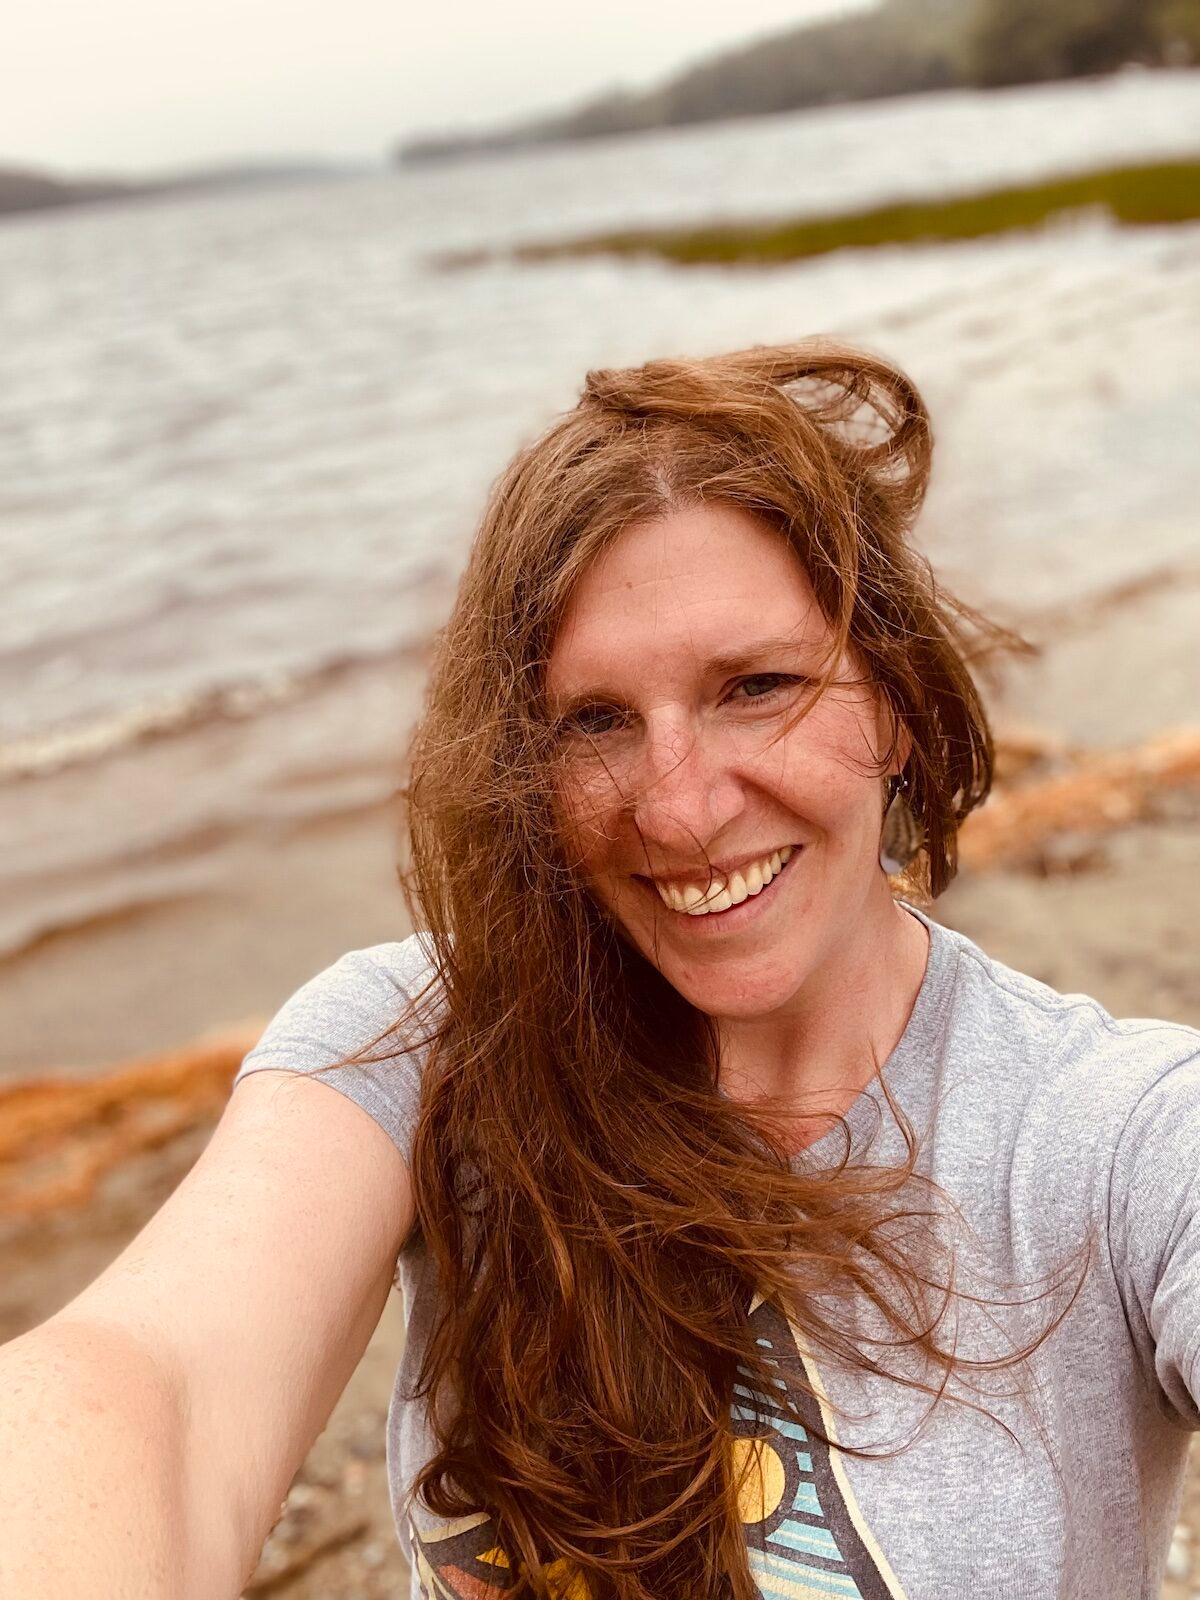 Maine parent Amber Lavigne learned that school officials started to gender transition her daughter without her knowledge. The photo was taken at Biscay Pond, Maine, on June 27, 2022. (Courtesy of Amber Lavigne)